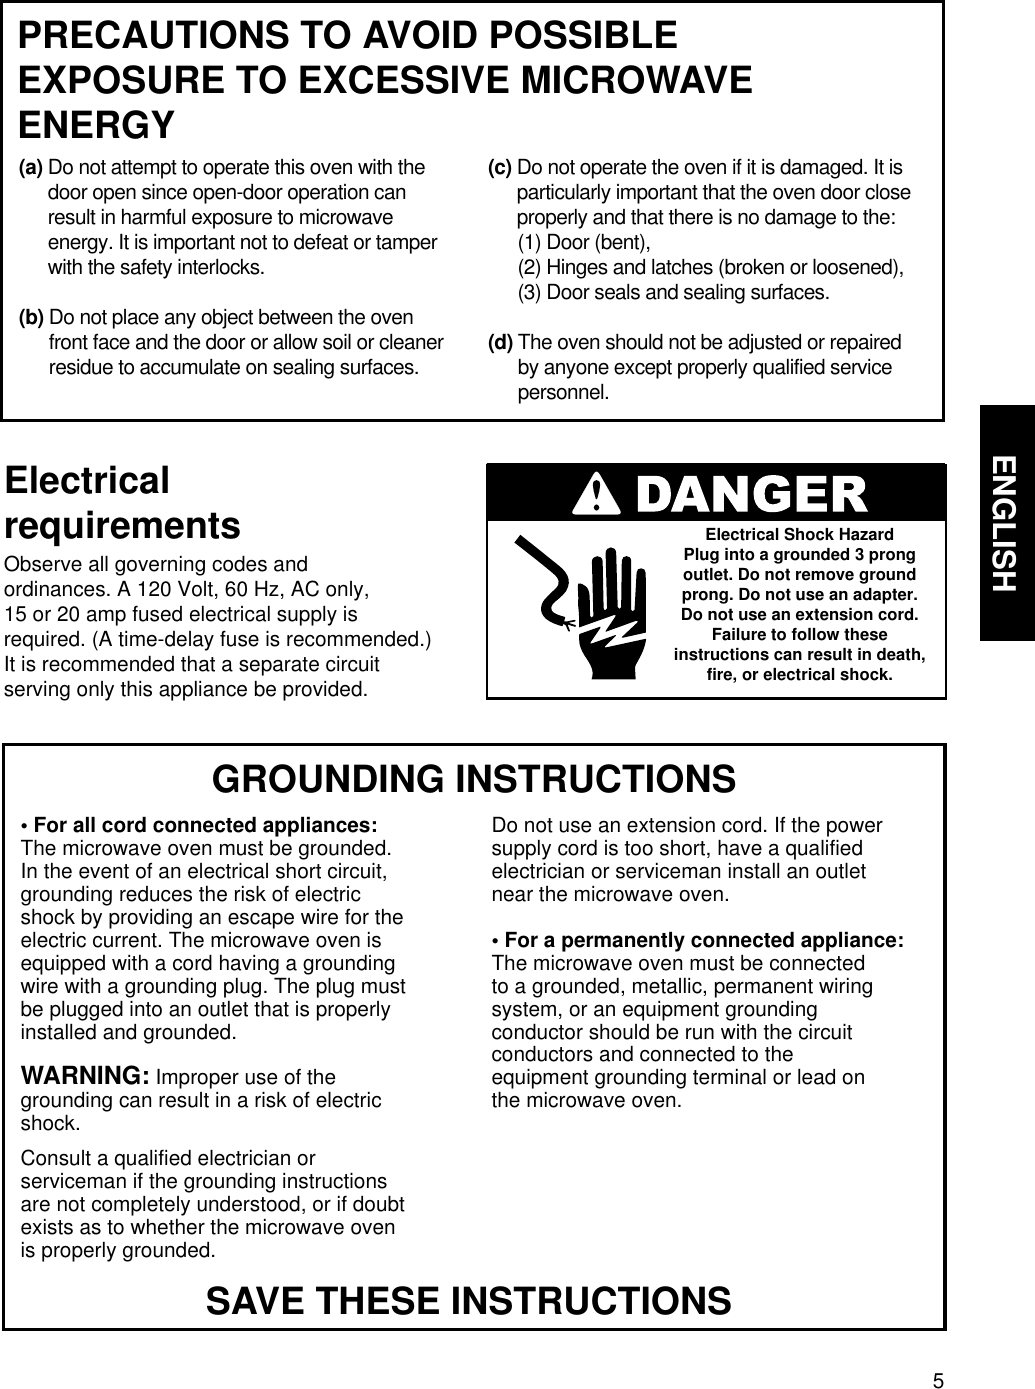 5ENGLISHMICROWAVE OVEN SAFETY  GROUNDING INSTRUCTIONS• For all cord connected appliances:The microwave oven must be grounded.In the event of an electrical short circuit,grounding reduces the risk of electricshock by providing an escape wire for theelectric current. The microwave oven isequipped with a cord having a groundingwire with a grounding plug. The plug mustbe plugged into an outlet that is properlyinstalled and grounded.WARNING: Improper use of thegrounding can result in a risk of electricshock.Consult a qualified electrician orserviceman if the grounding instructionsare not completely understood, or if doubtexists as to whether the microwave ovenis properly grounded.Do not use an extension cord. If the powersupply cord is too short, have a qualifiedelectrician or serviceman install an outletnear the microwave oven.• For a permanently connected appliance:The microwave oven must be connectedto a grounded, metallic, permanent wiringsystem, or an equipment groundingconductor should be run with the circuitconductors and connected to theequipment grounding terminal or lead onthe microwave oven.ElectricalrequirementsObserve all governing codes andordinances. A 120 Volt, 60 Hz, AC only,15 or 20 amp fused electrical supply isrequired. (A time-delay fuse is recommended.)It is recommended that a separate circuitserving only this appliance be provided.Electrical Shock HazardPlug into a grounded 3 prongoutlet. Do not remove groundprong. Do not use an adapter.Do not use an extension cord.Failure to follow theseinstructions can result in death,fire, or electrical shock.SAVE THESE INSTRUCTIONSPRECAUTIONS TO AVOID POSSIBLEEXPOSURE TO EXCESSIVE MICROWAVEENERGY(a) Do not attempt to operate this oven with thedoor open since open-door operation canresult in harmful exposure to microwaveenergy. It is important not to defeat or tamperwith the safety interlocks.(b) Do not place any object between the ovenfront face and the door or allow soil or cleanerresidue to accumulate on sealing surfaces.(c) Do not operate the oven if it is damaged. It isparticularly important that the oven door closeproperly and that there is no damage to the:(1) Door (bent),(2) Hinges and latches (broken or loosened),(3) Door seals and sealing surfaces.(d) The oven should not be adjusted or repairedby anyone except properly qualified servicepersonnel.